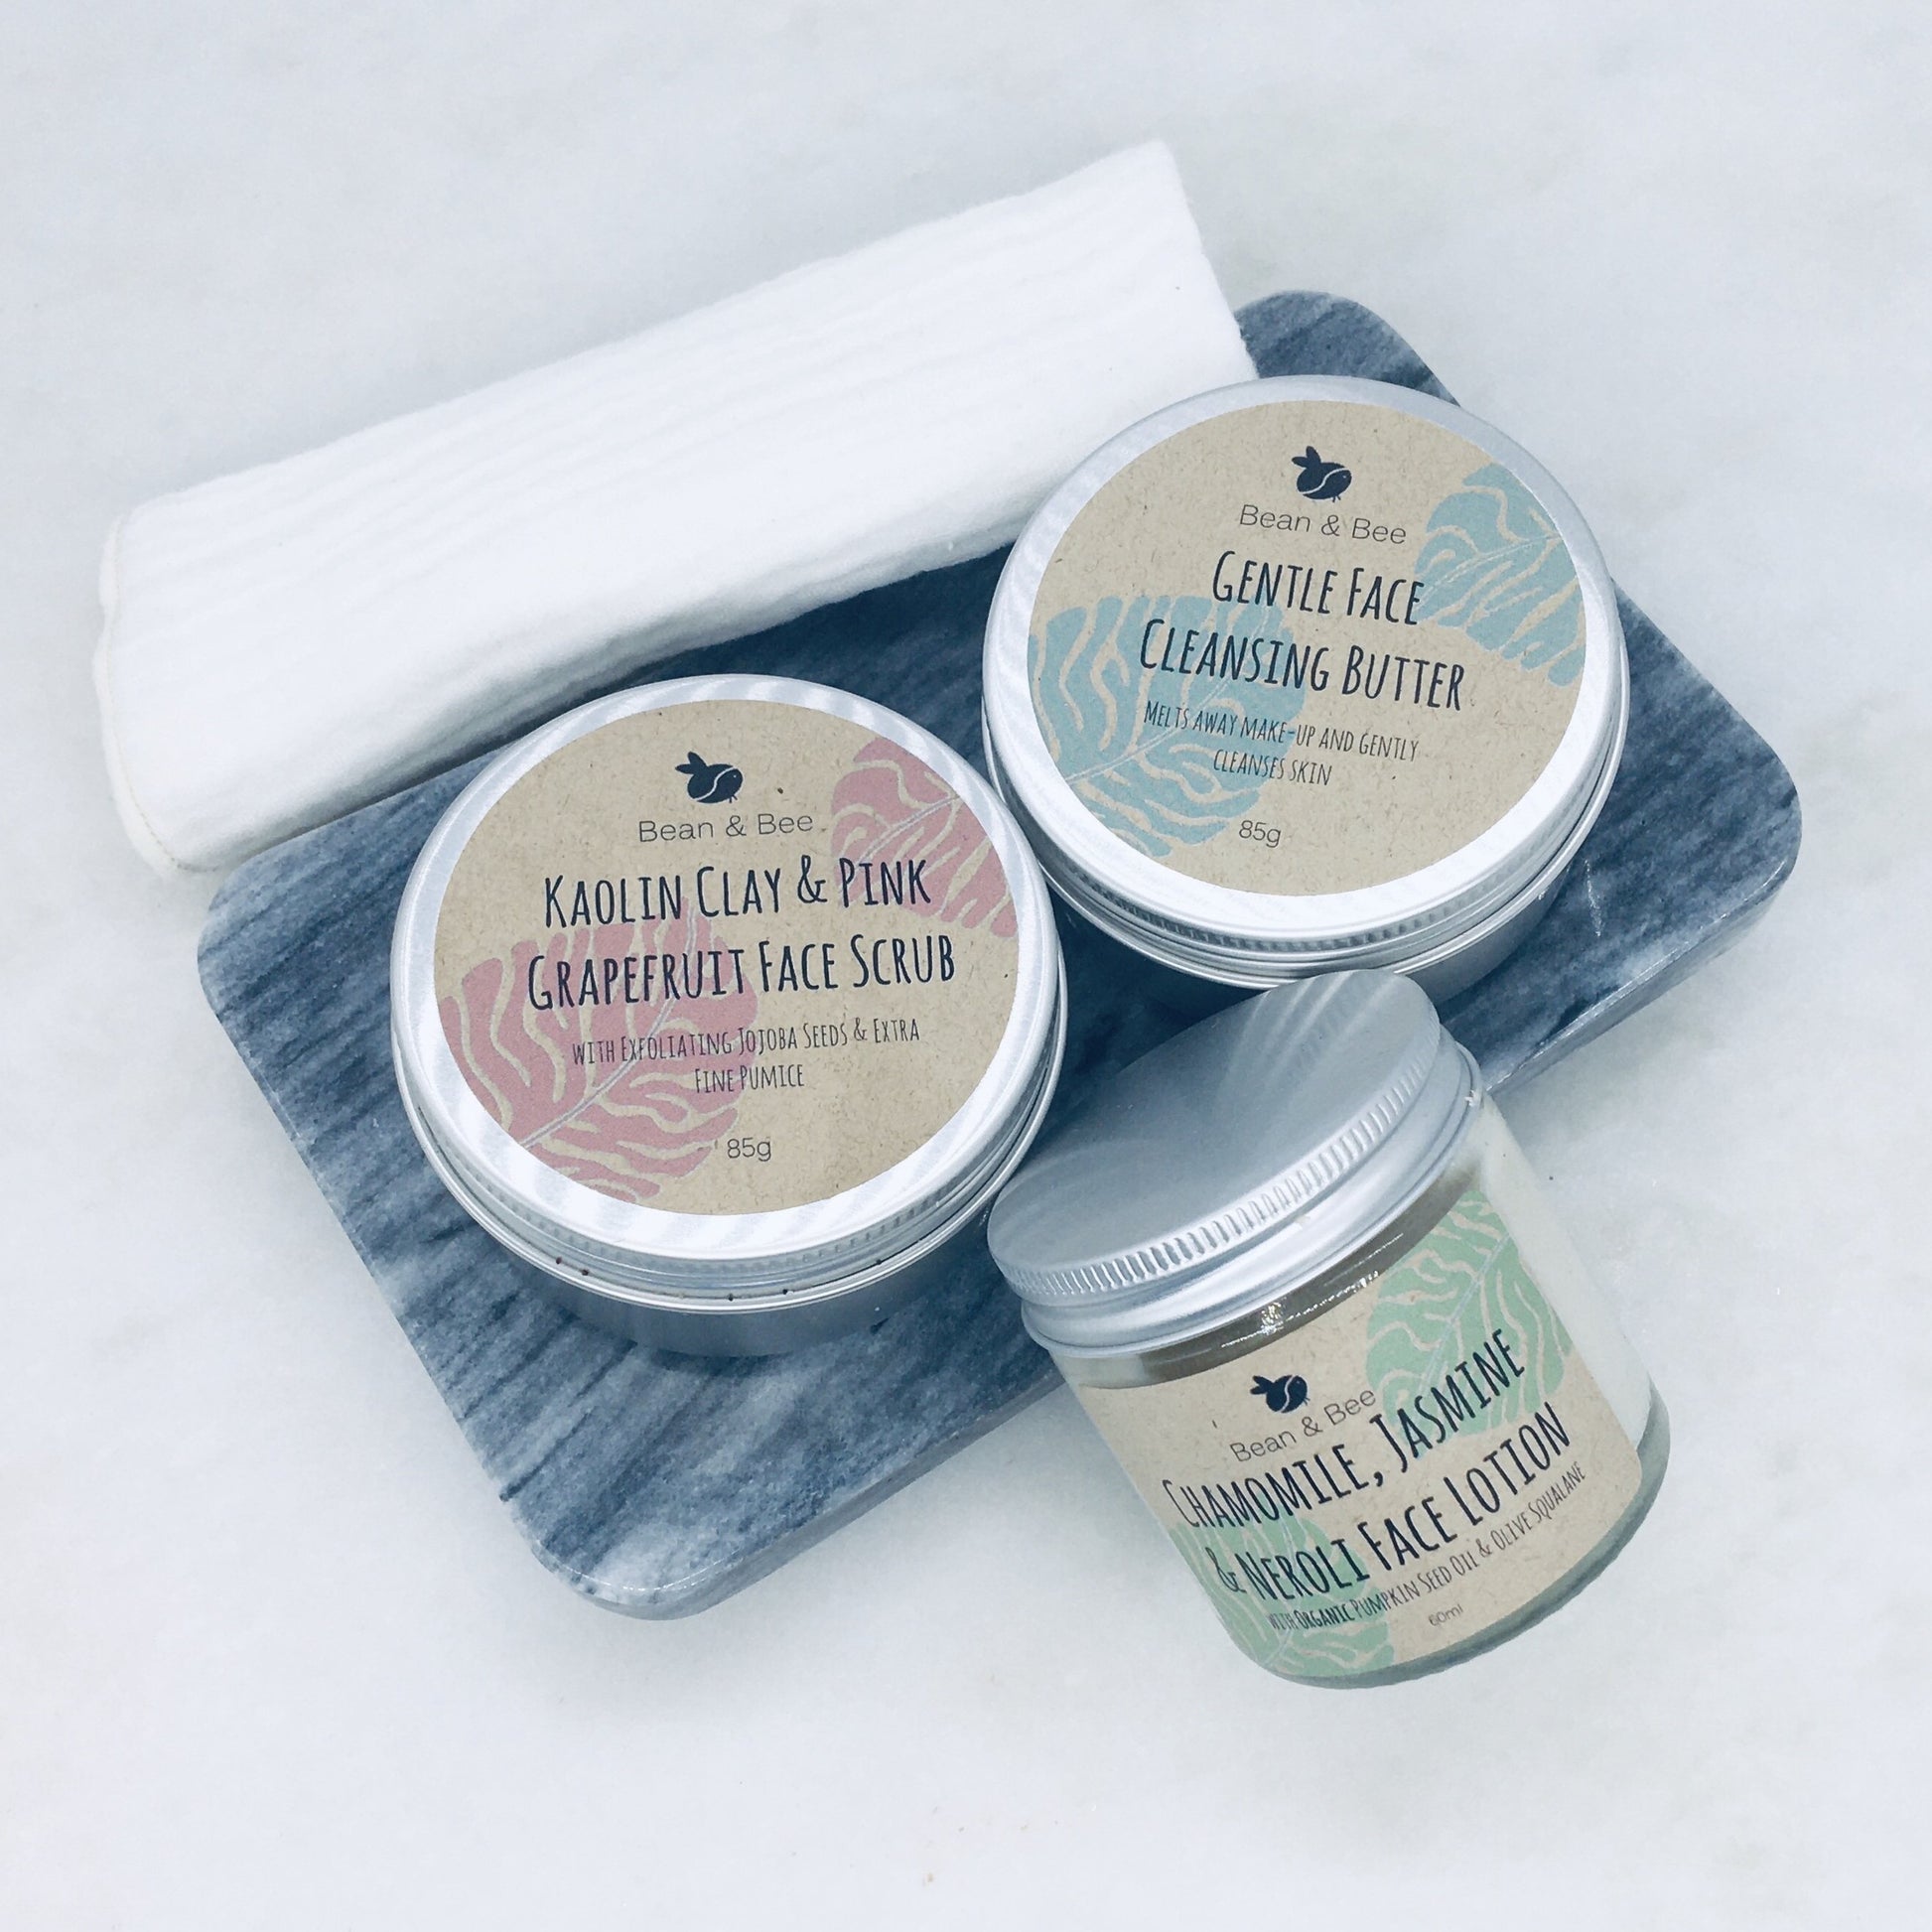 Happy face skin care kit - Bean and Bee